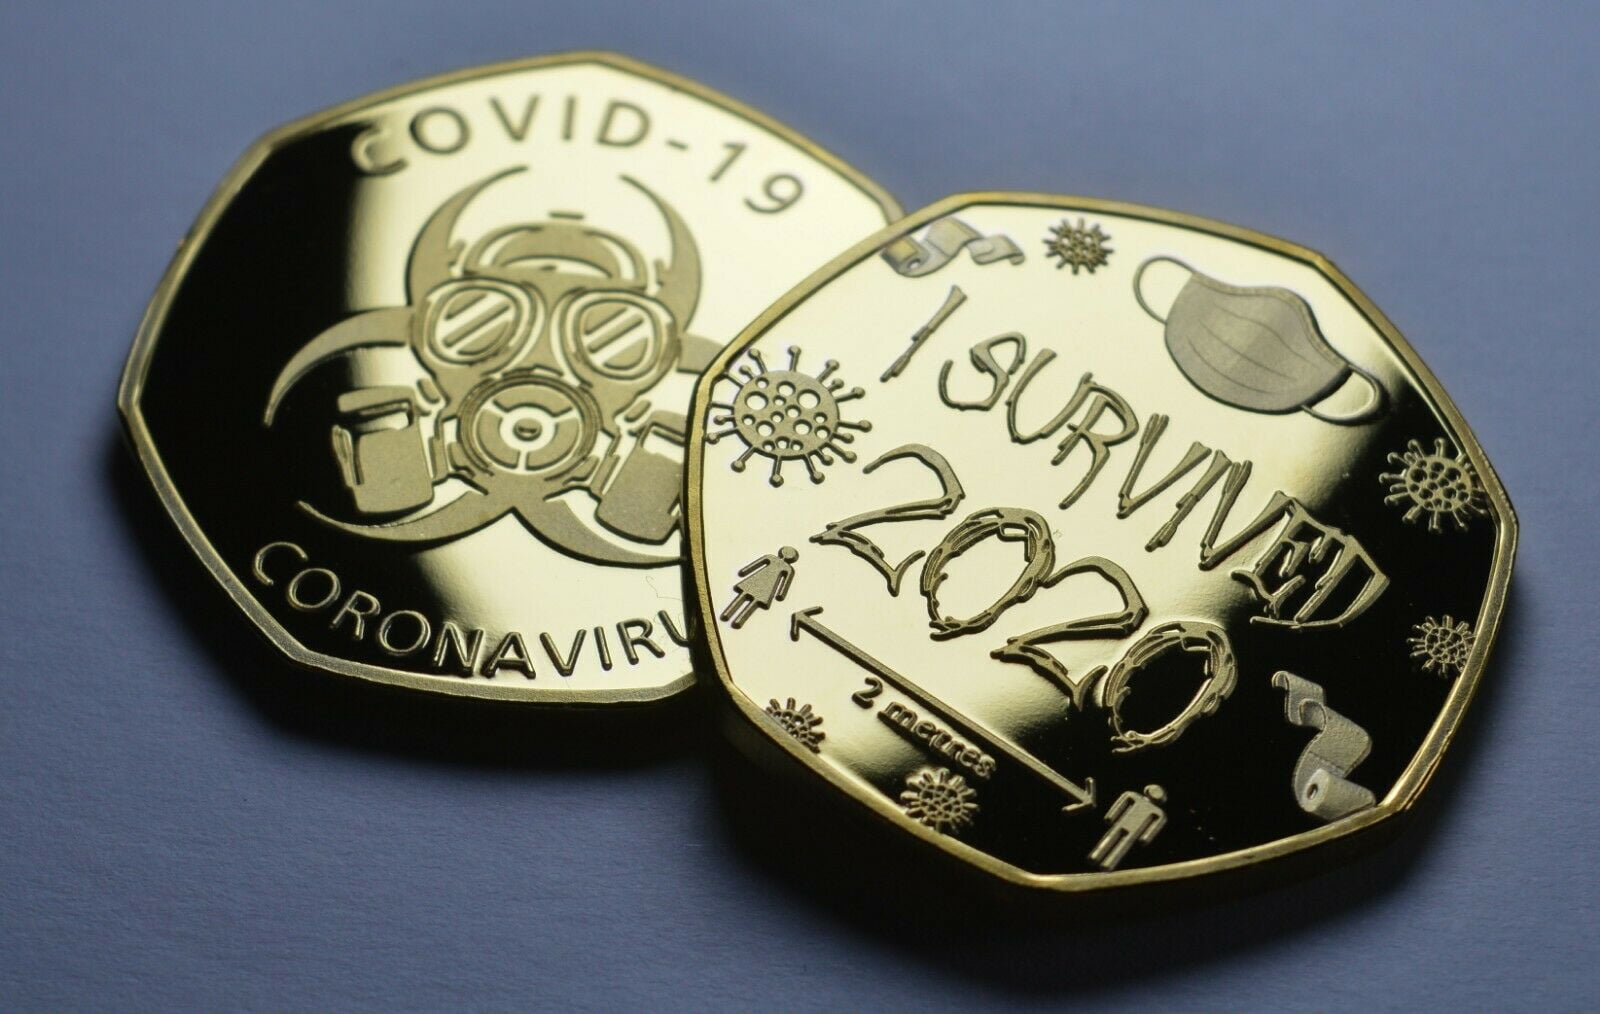 2x I Survived 2020 Medal and Commemorative Collectors Memento Gift Gold+Silver 